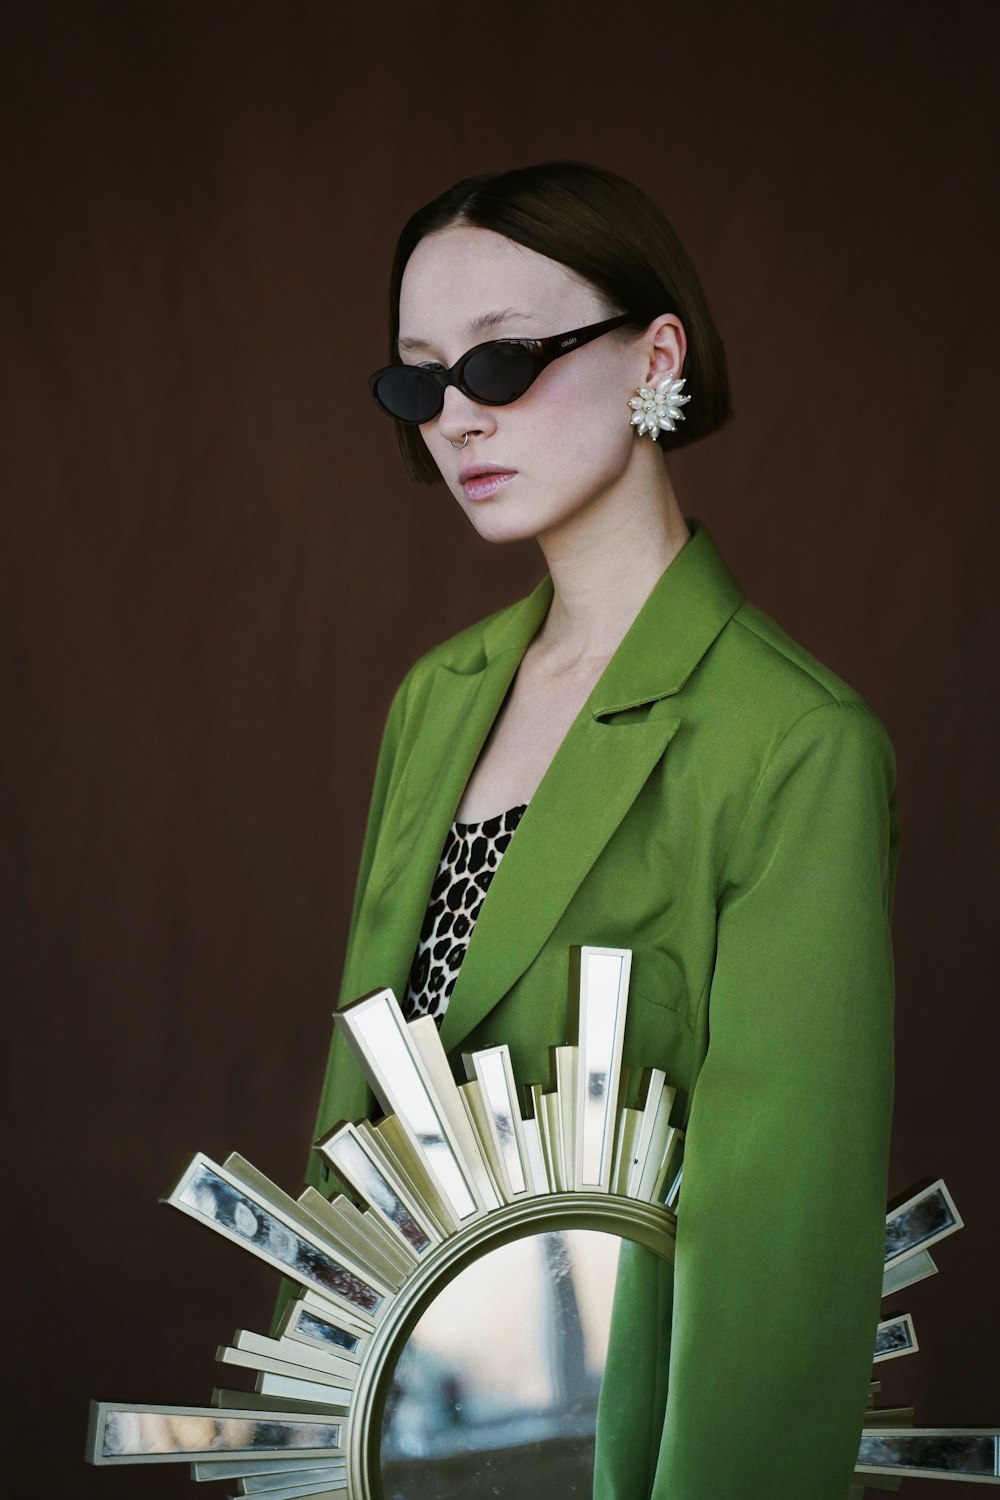 woman wearing green notched lapel suit jacket, sunglasses, and white earring standing